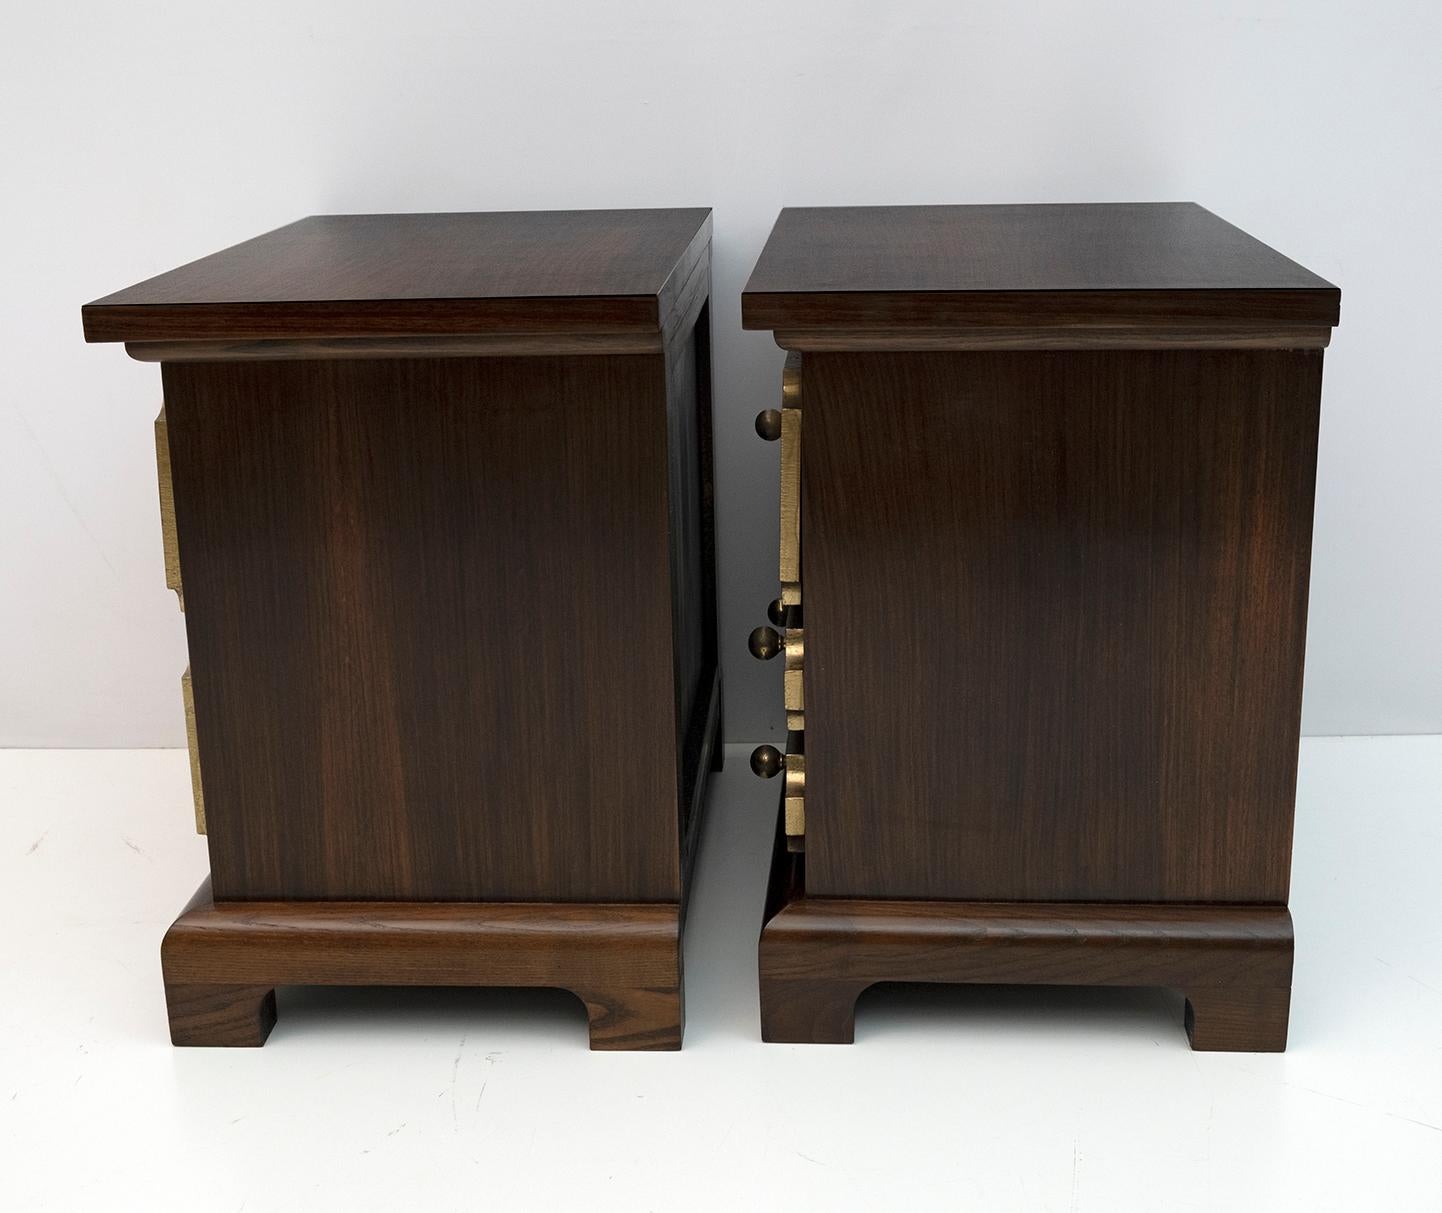 Pair of Luciano Frigerio Mid-Century Modern Italian Bedside Tables, 1960s For Sale 1